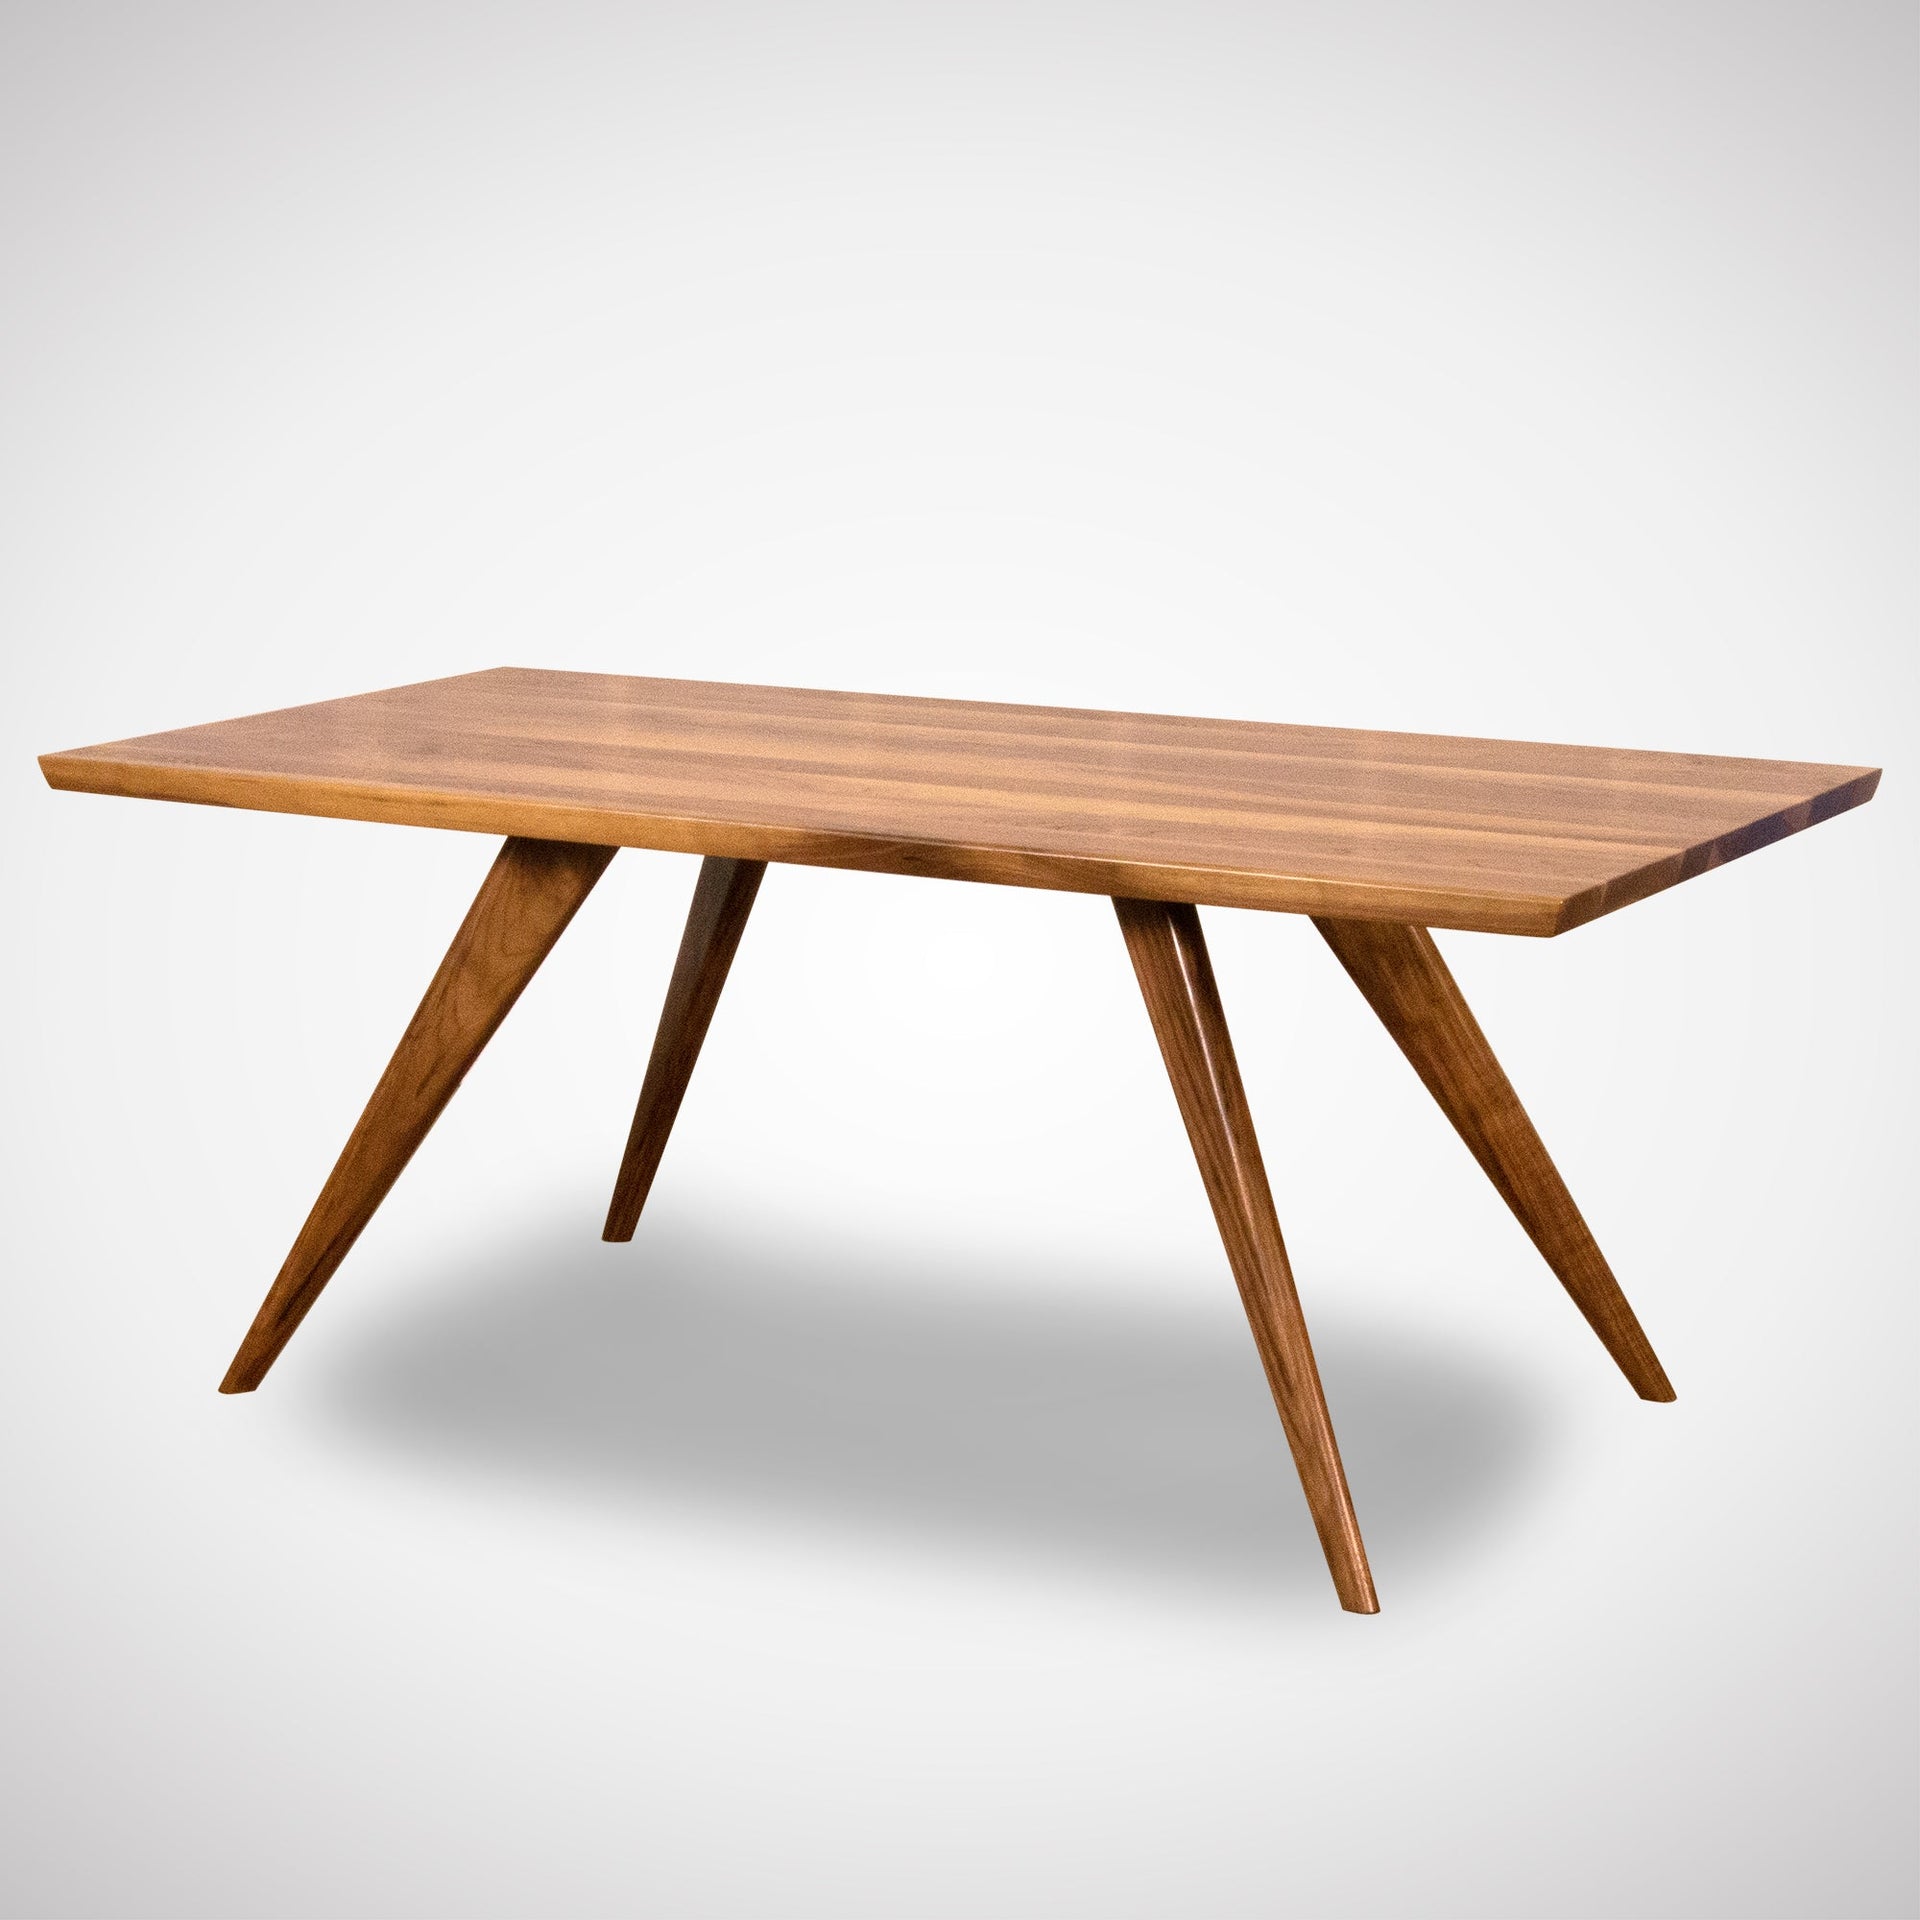 Solid wood modern dining table